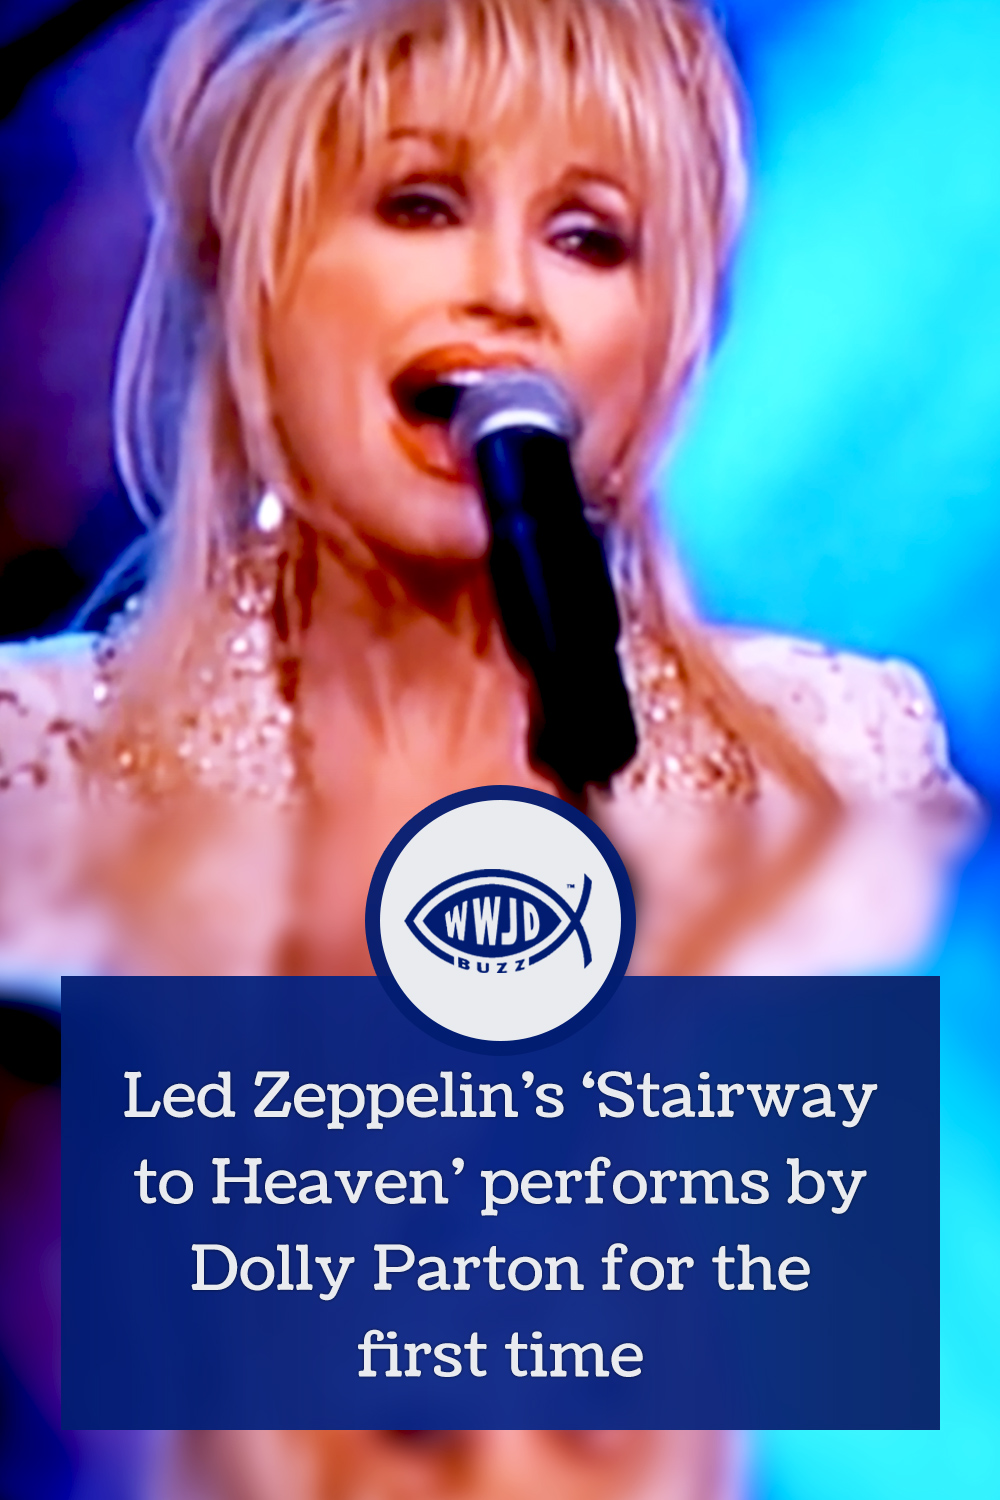 Led Zeppelin’s ‘Stairway to Heaven’ performs by Dolly Parton for the first time